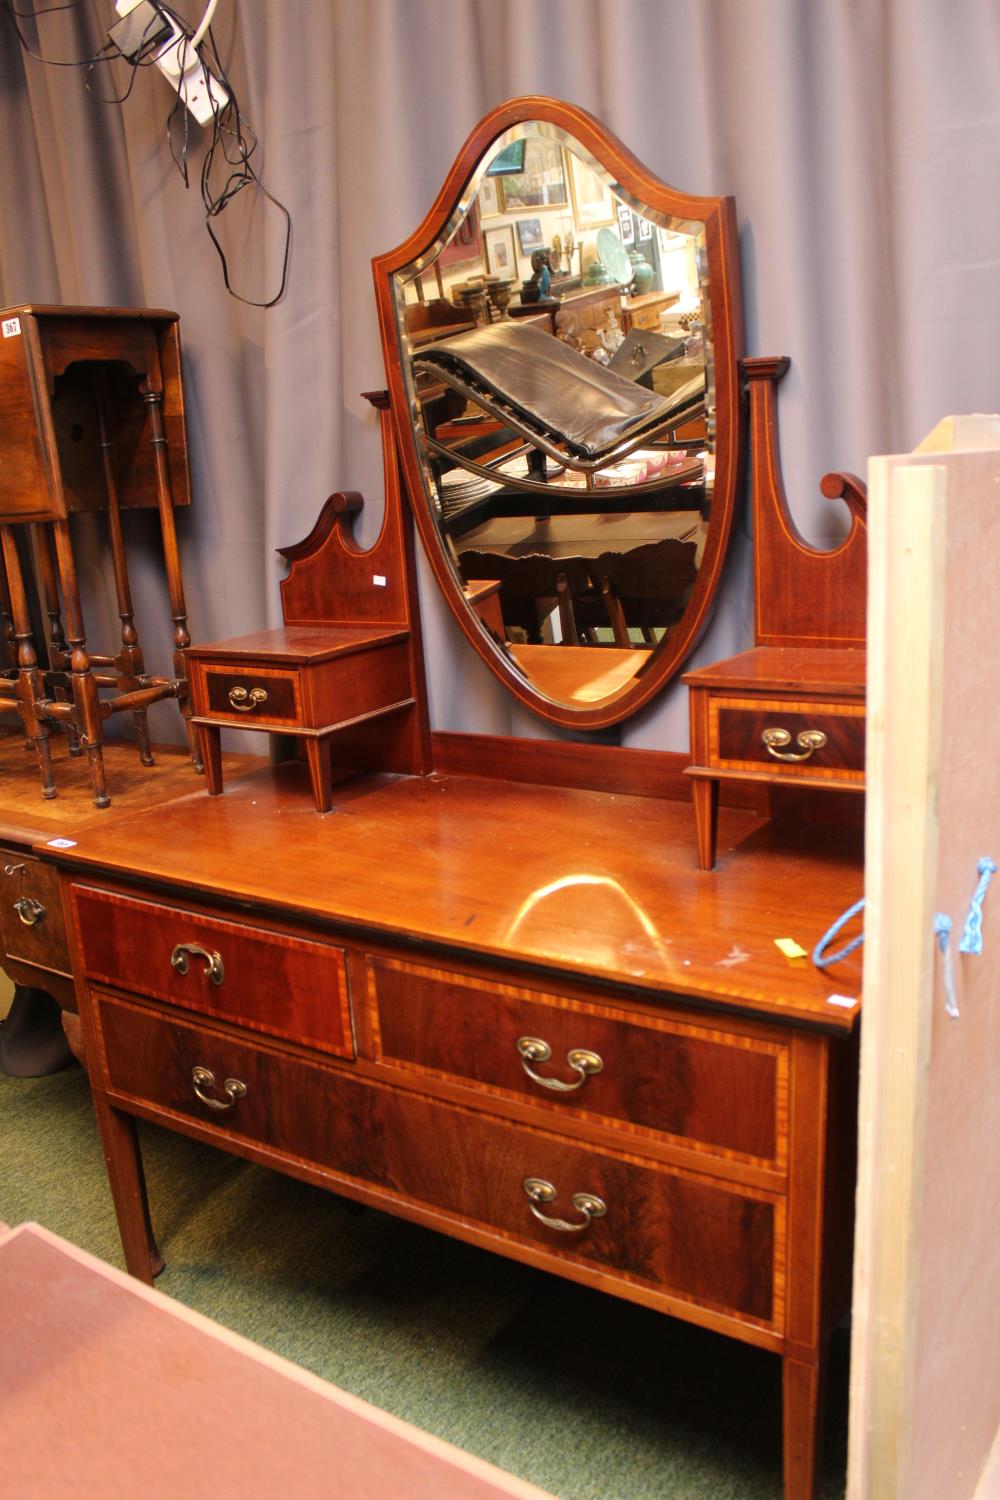 Edwardian Walnut and Satinwood Inlaid dressing table with Shield back mirror